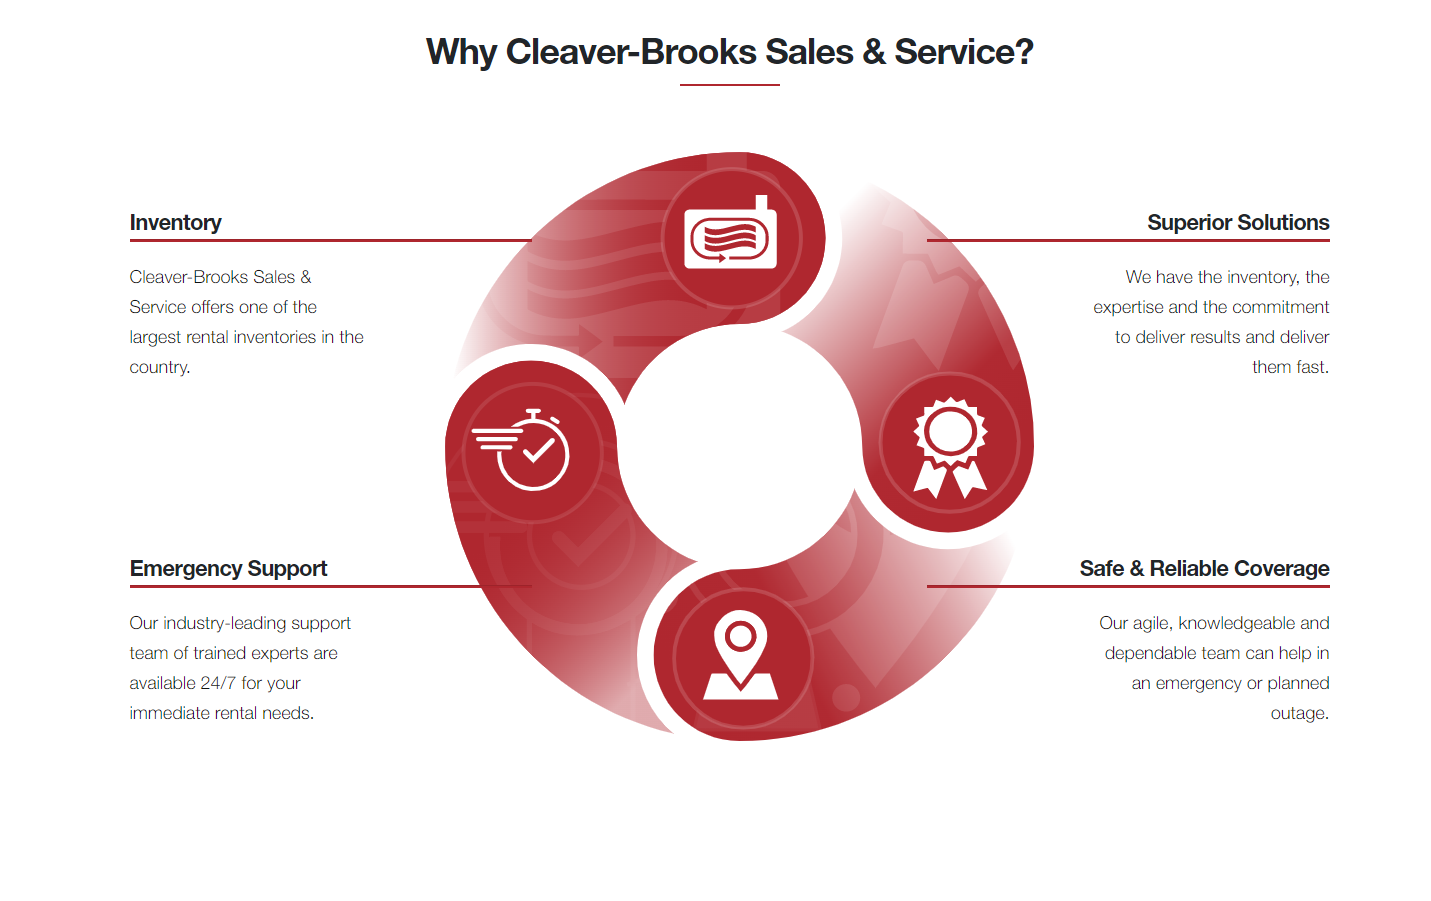 The benefits of using Cleaver-Brooks Sales & Service is our inventory, superior solutions, emergency support, and safe and reliable coverage.